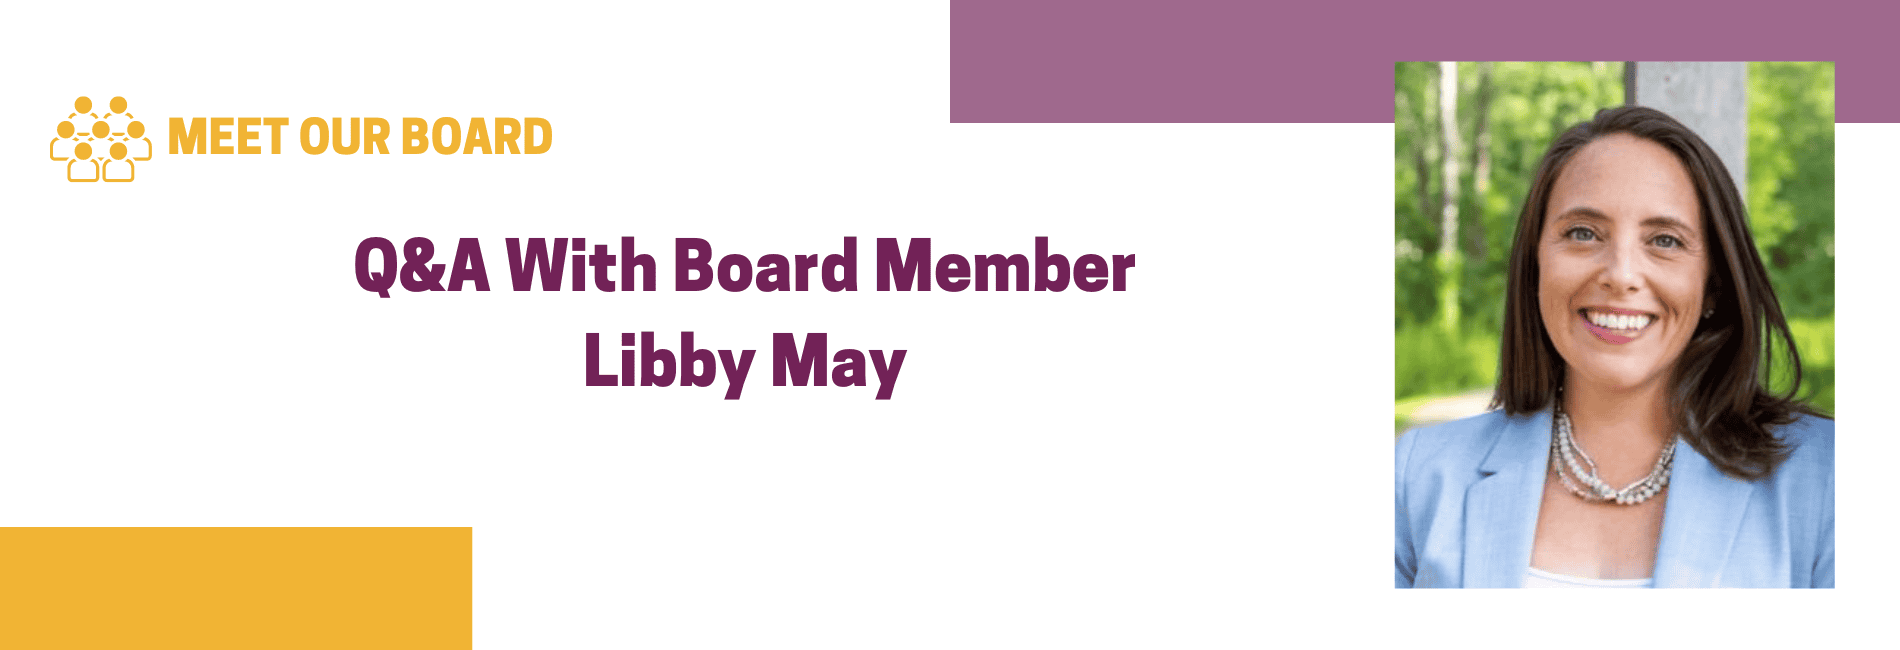 Q&A With Board Member Libby May